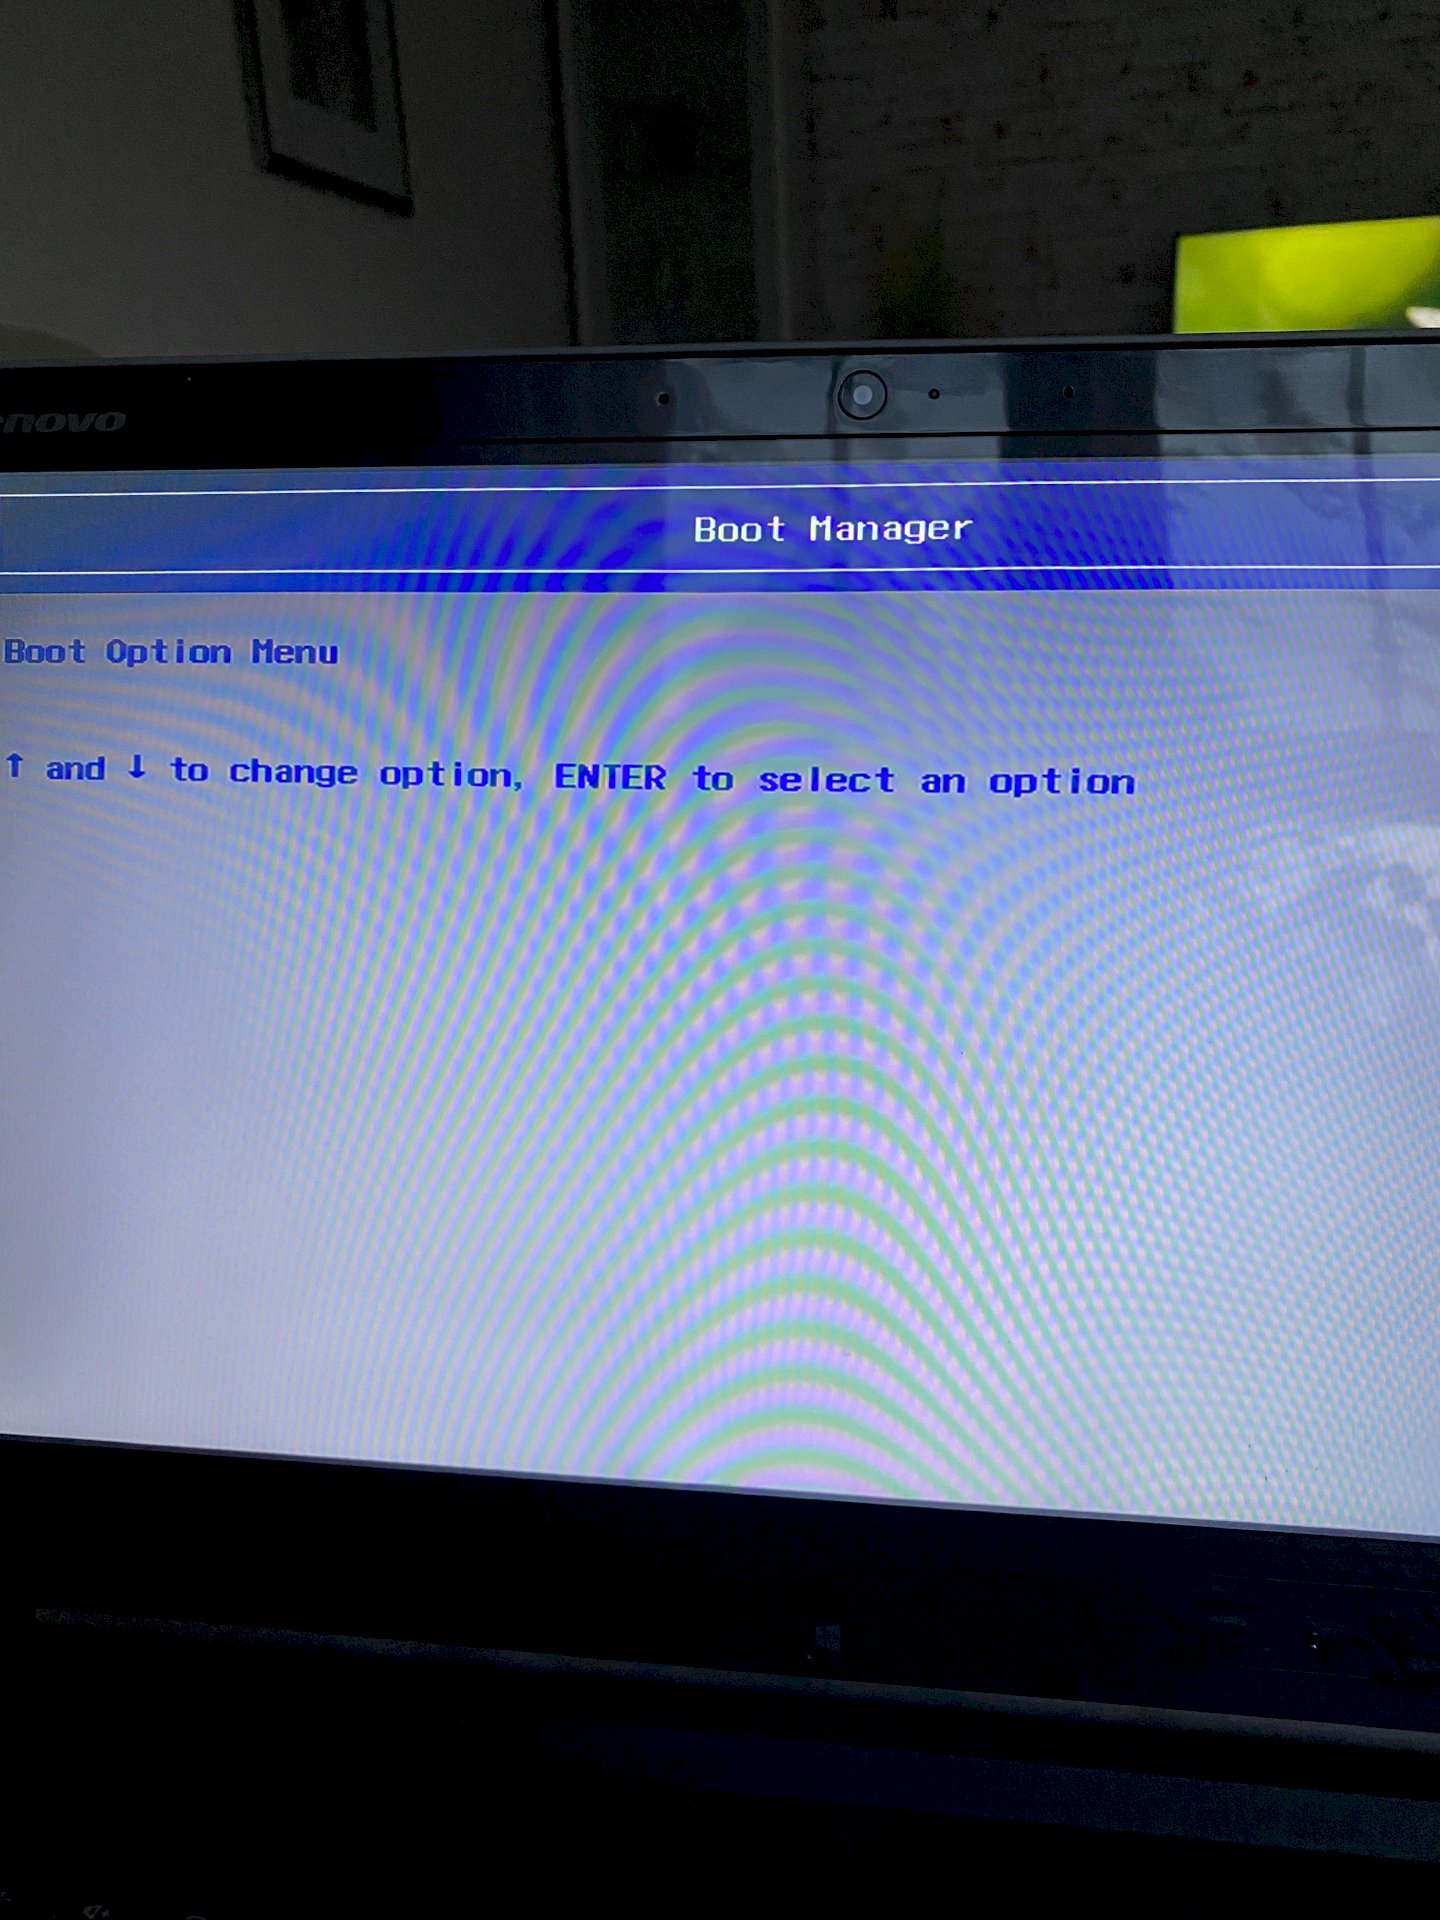 After booting up the laptop, do I get to the Boot Manager - 1